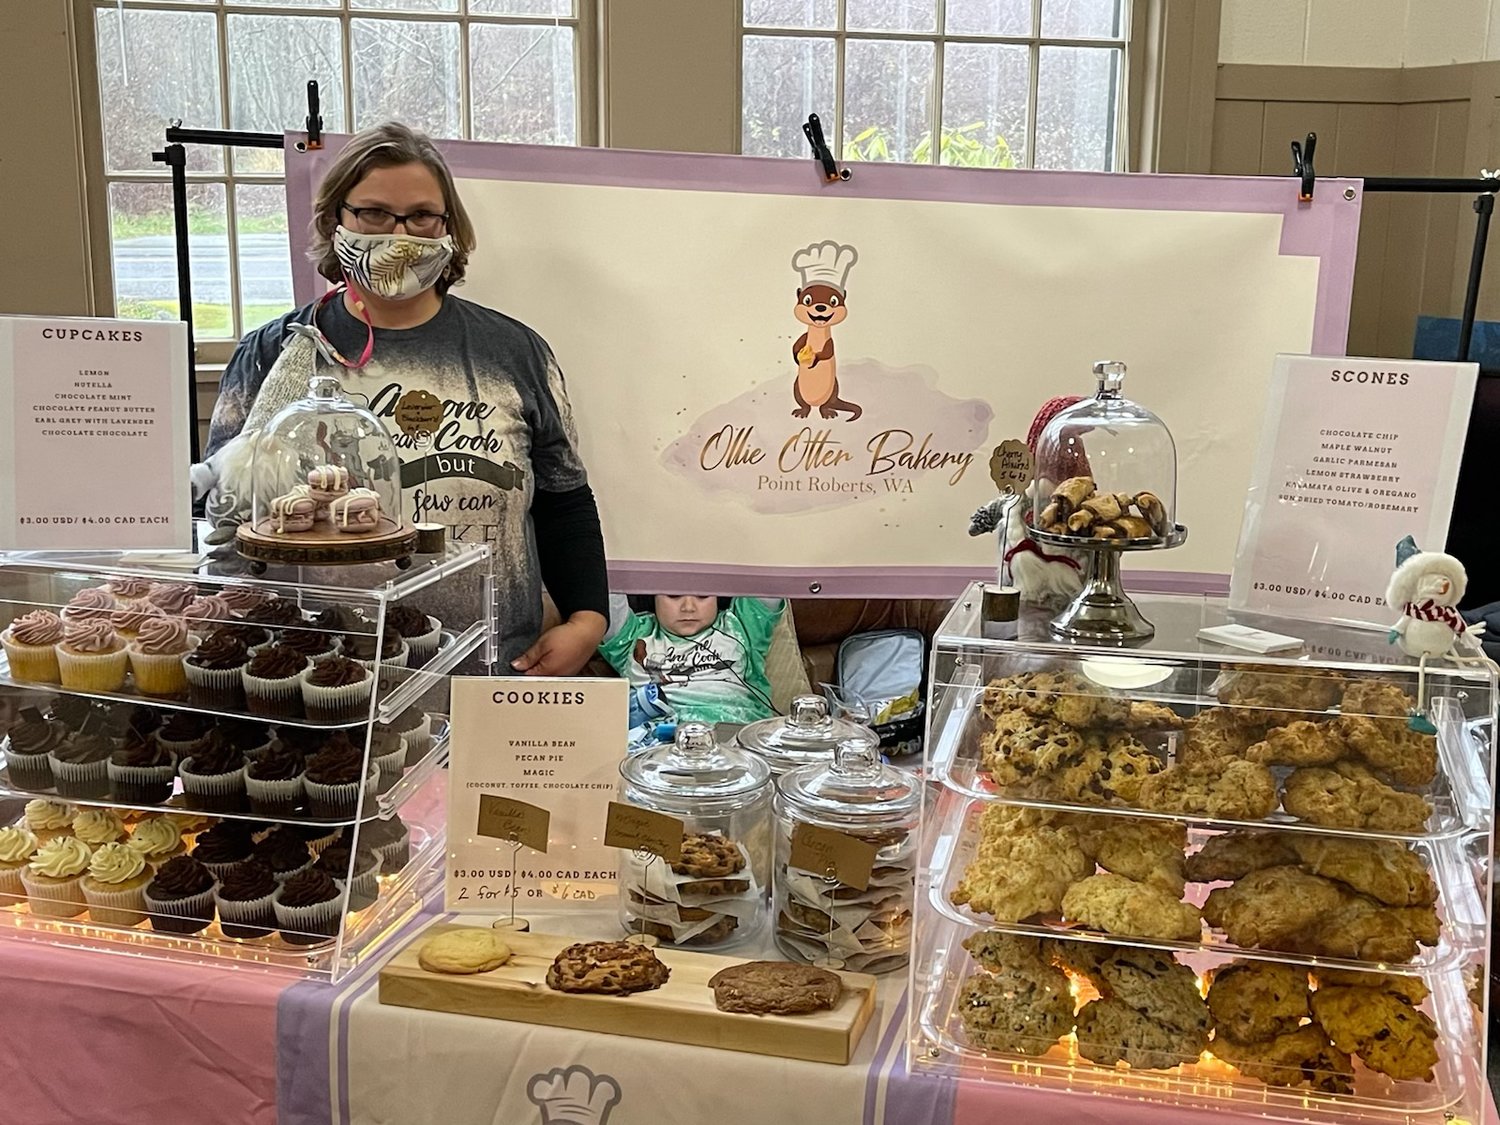 s Kathleen Friedman attending her Ollie Otter Bakery booth at Your Local Small Market.